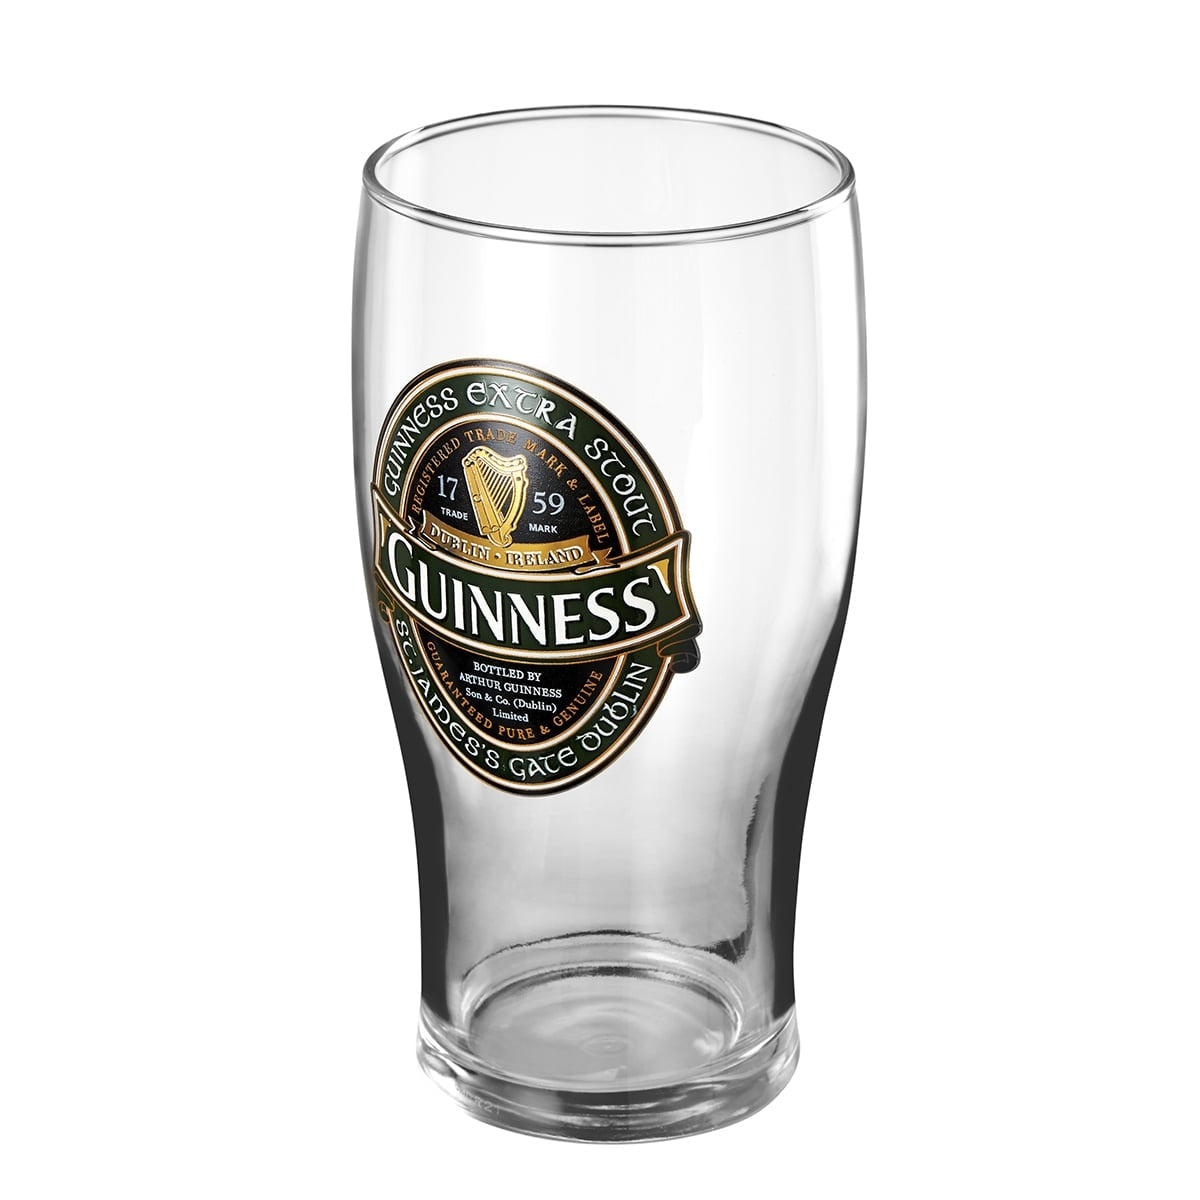 Guinness Ireland Collection Pint Glass - 24 Pack, perfect for pouring the perfect Guinness. (Brand Name: Guinness UK)